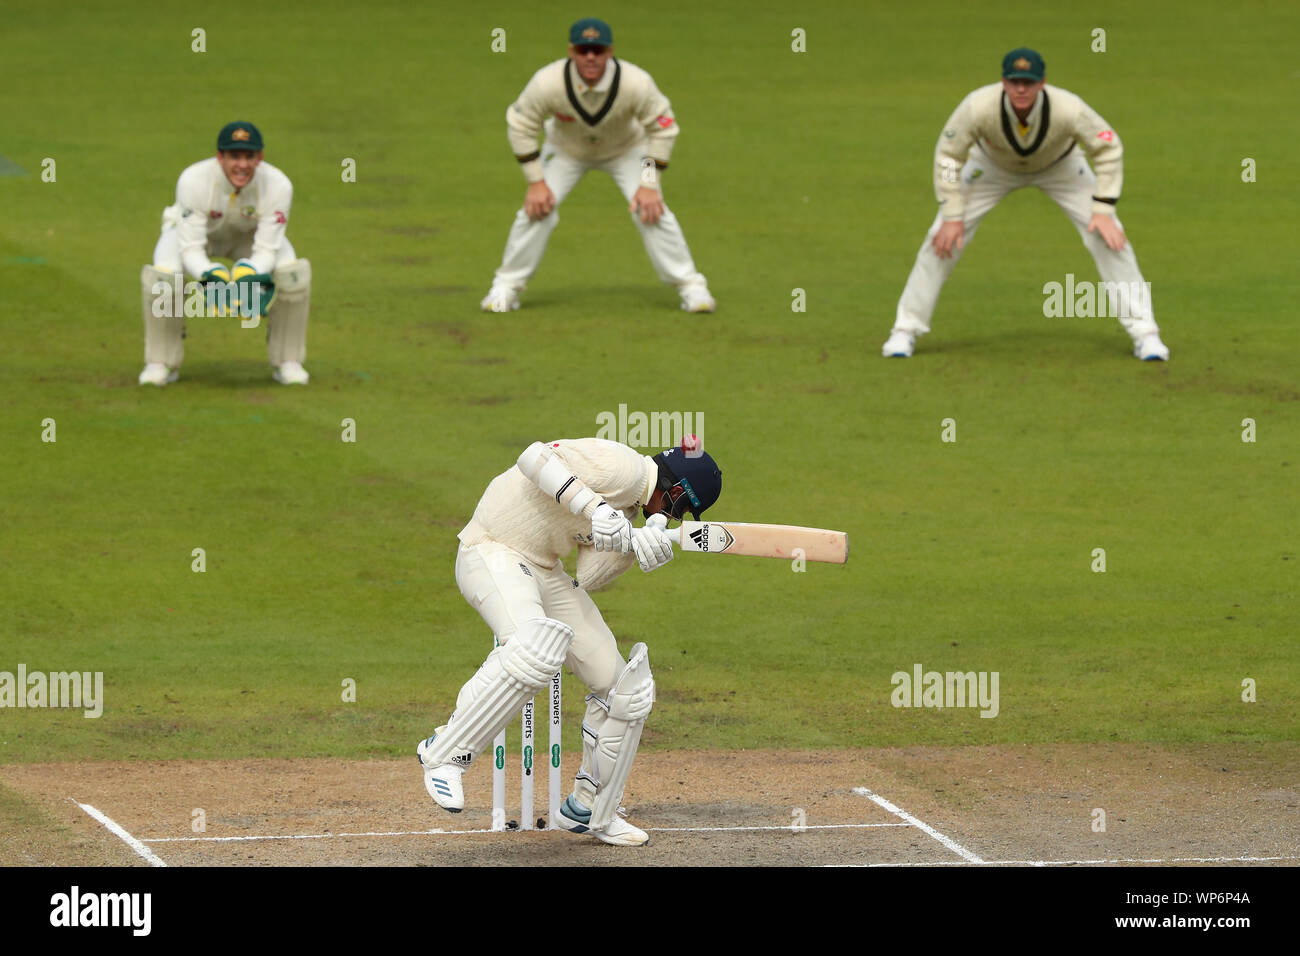 Manchester, UK. 07th Sep, 2019. Stuart Broad of England avoids a high ball during day four of the 4th Specsavers Ashes Test Match, at Old Trafford Cricket Ground, Manchester, England. Credit: ESPA/Alamy Live News Stock Photo